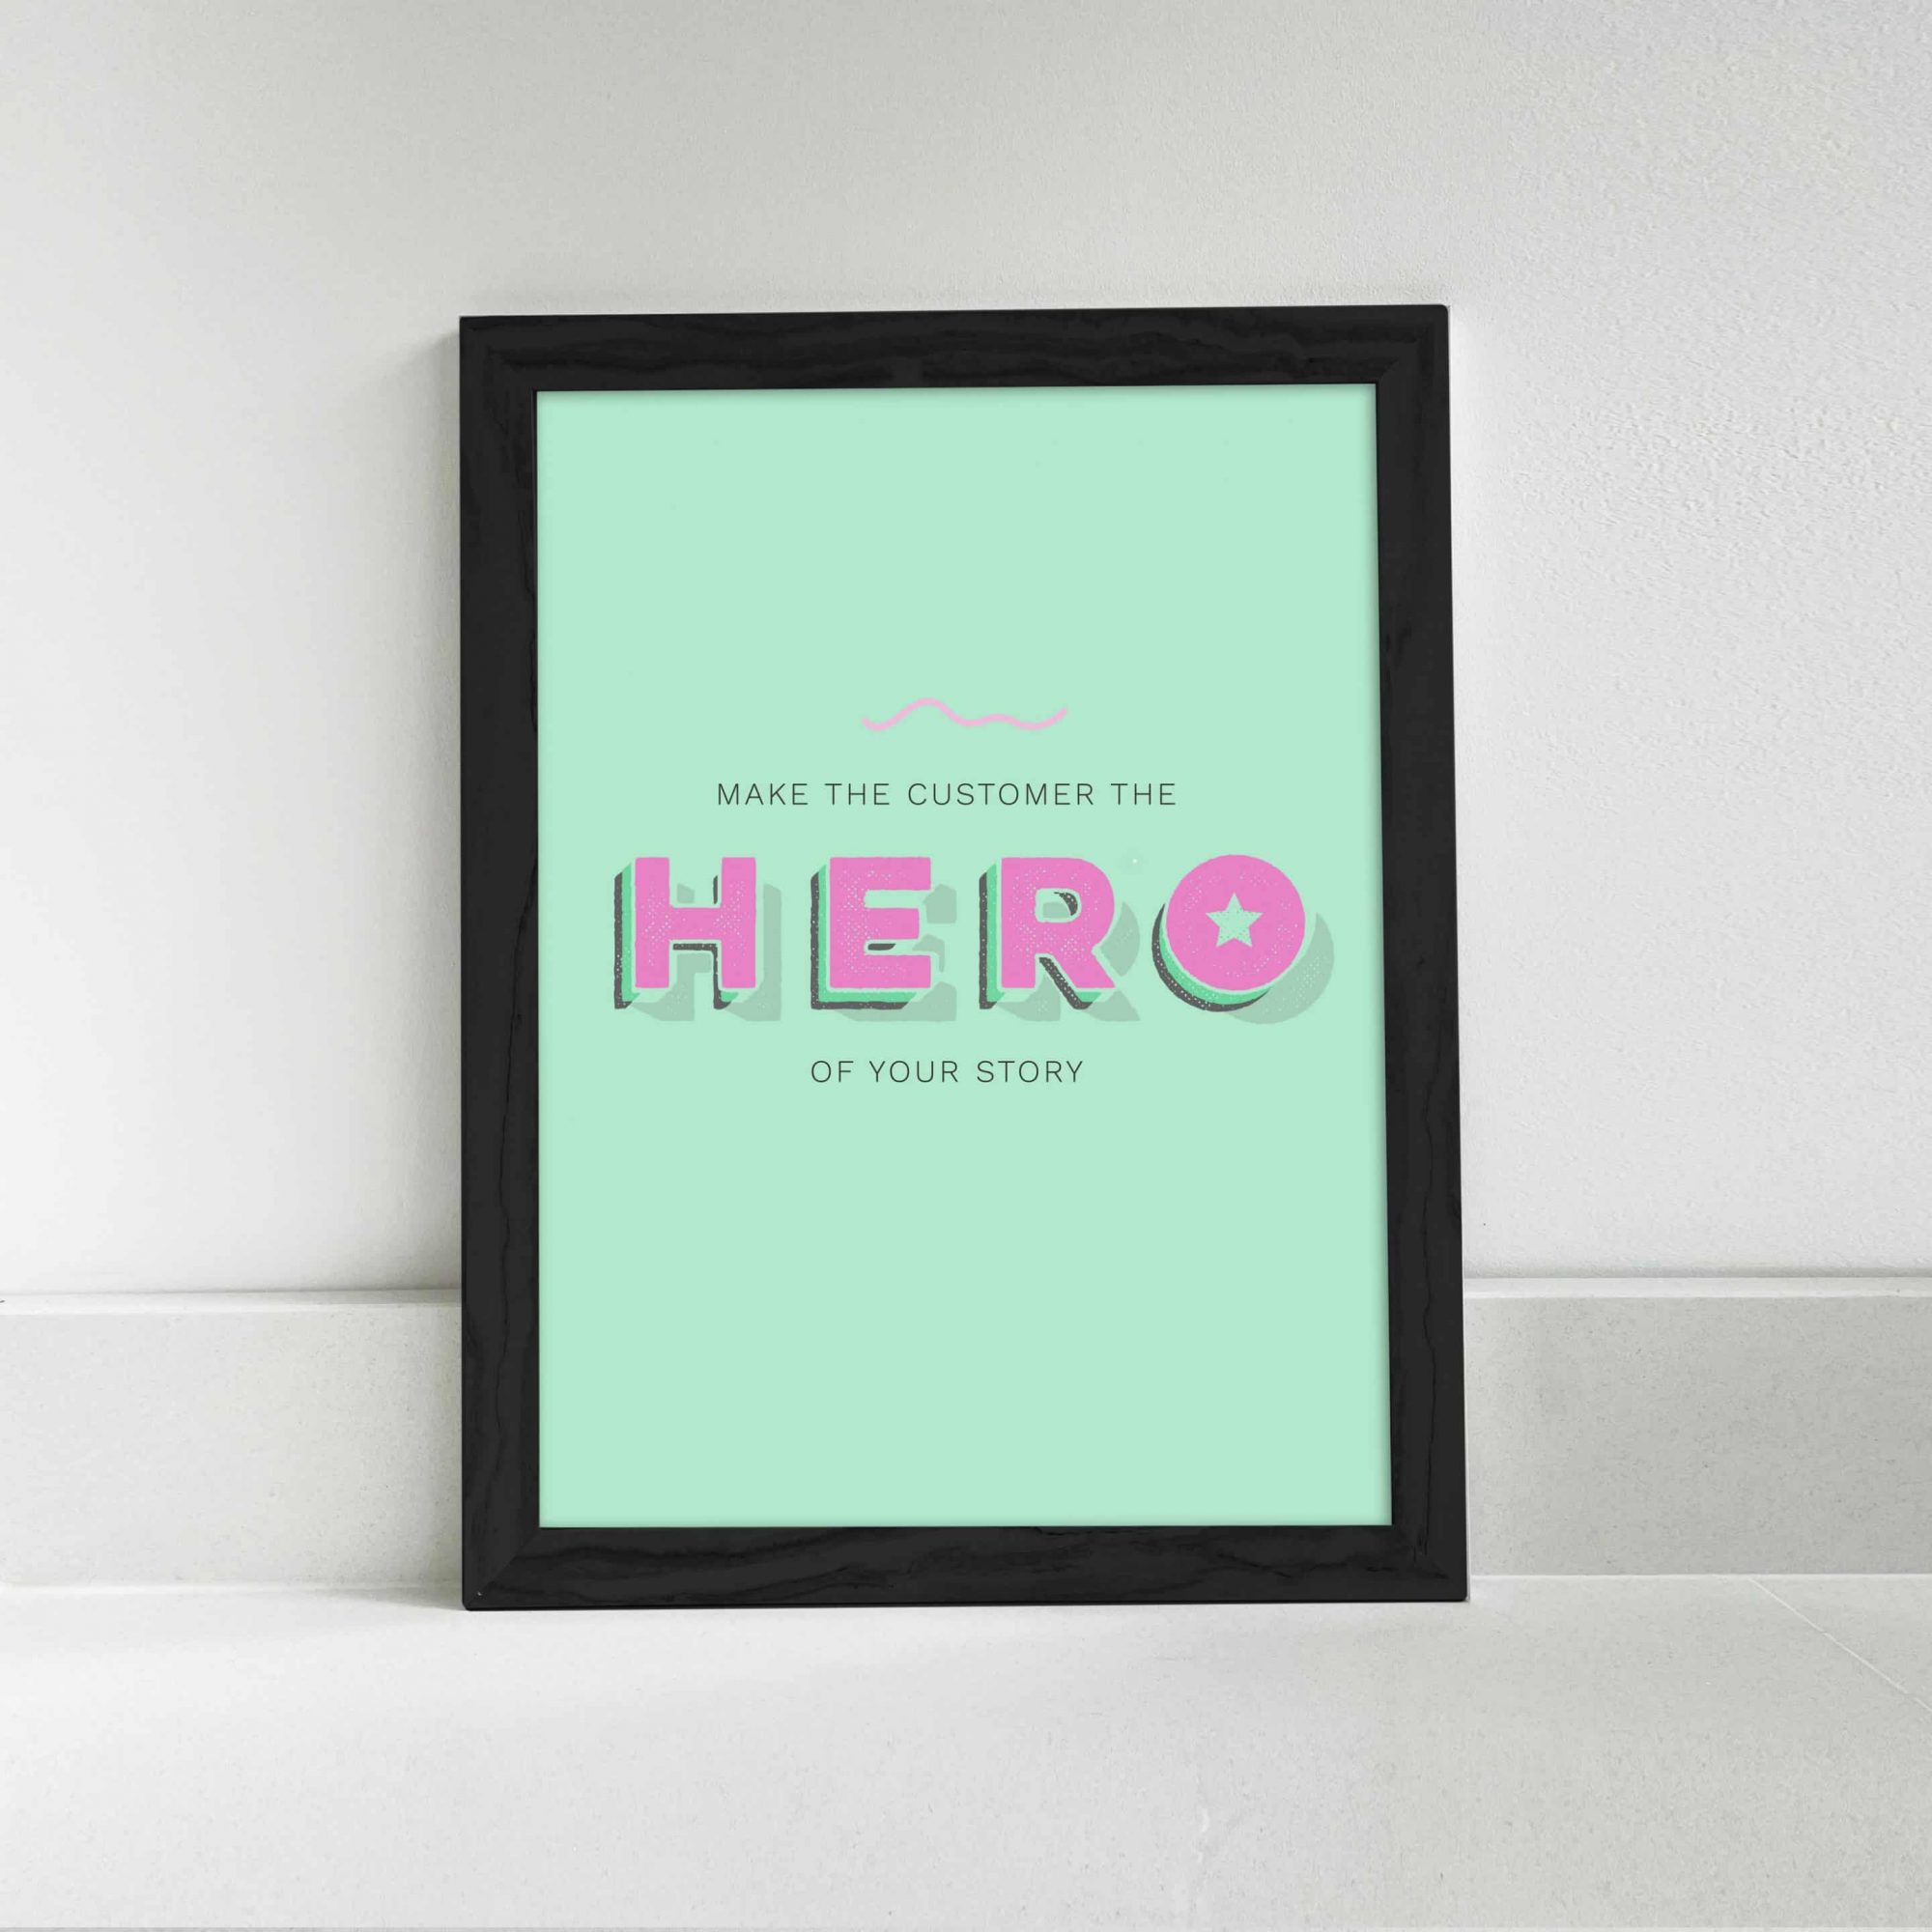 Make the customer the hero of your story - green